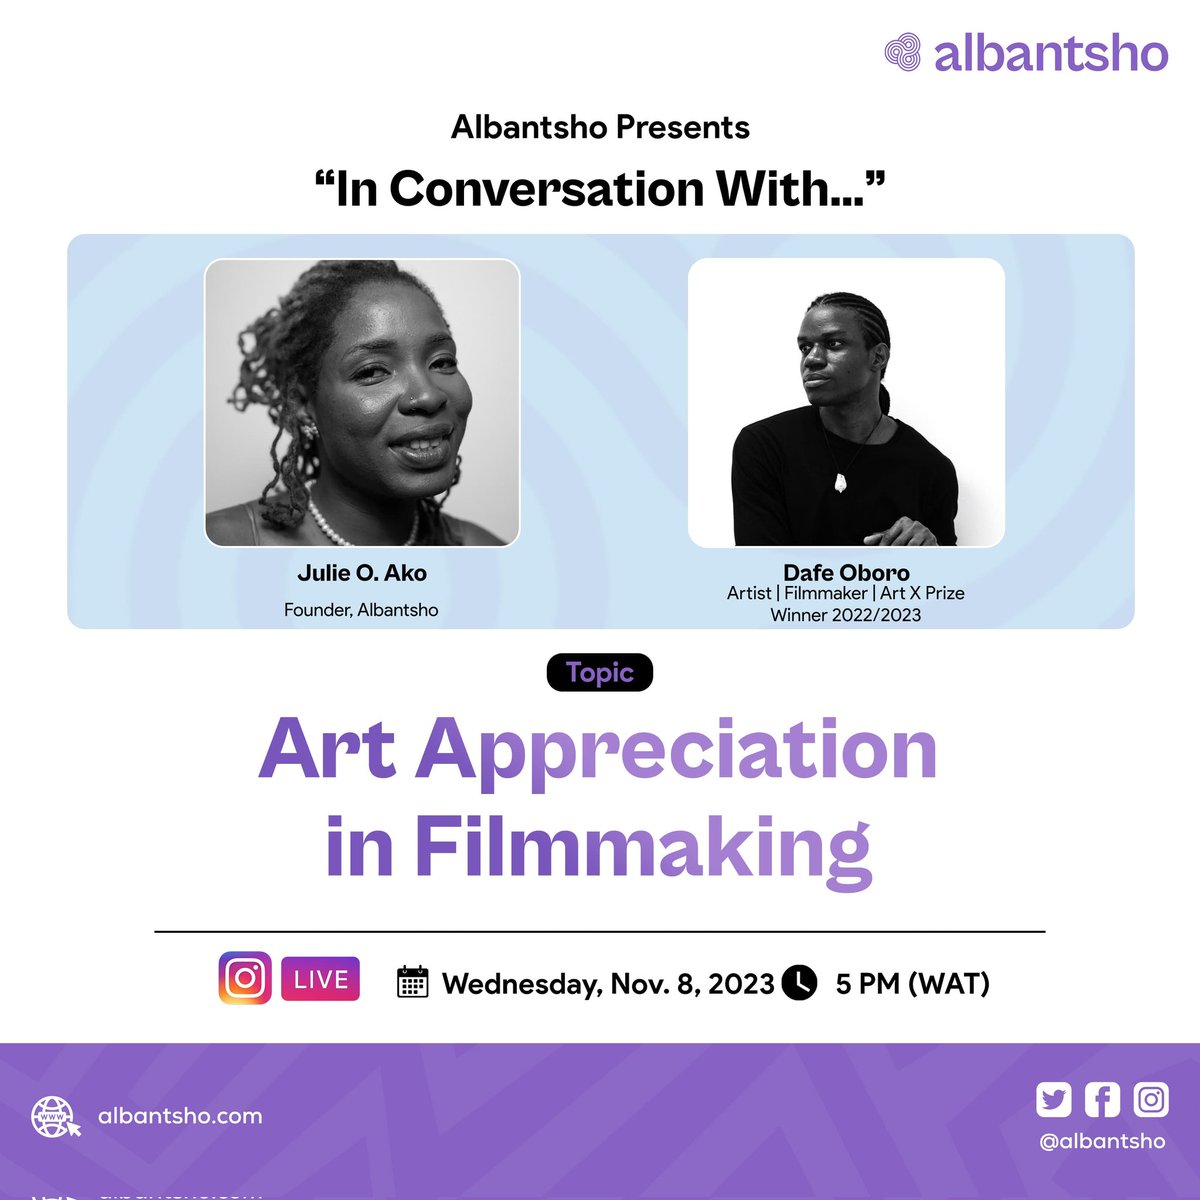 Dive into the magic where art meets filmmaking! 🌟 

Join us for 'In Conversation With...' featuring @DafeOboro. 

Happening today, Wed, Nov 8, 5 PM (WAT) on IG Live.

Set a reminder: instagram.com/p/CzWPosrMjQN/  💜

 #Albantsho #InConversationWith #DafeOboro #FilmmakingMagic